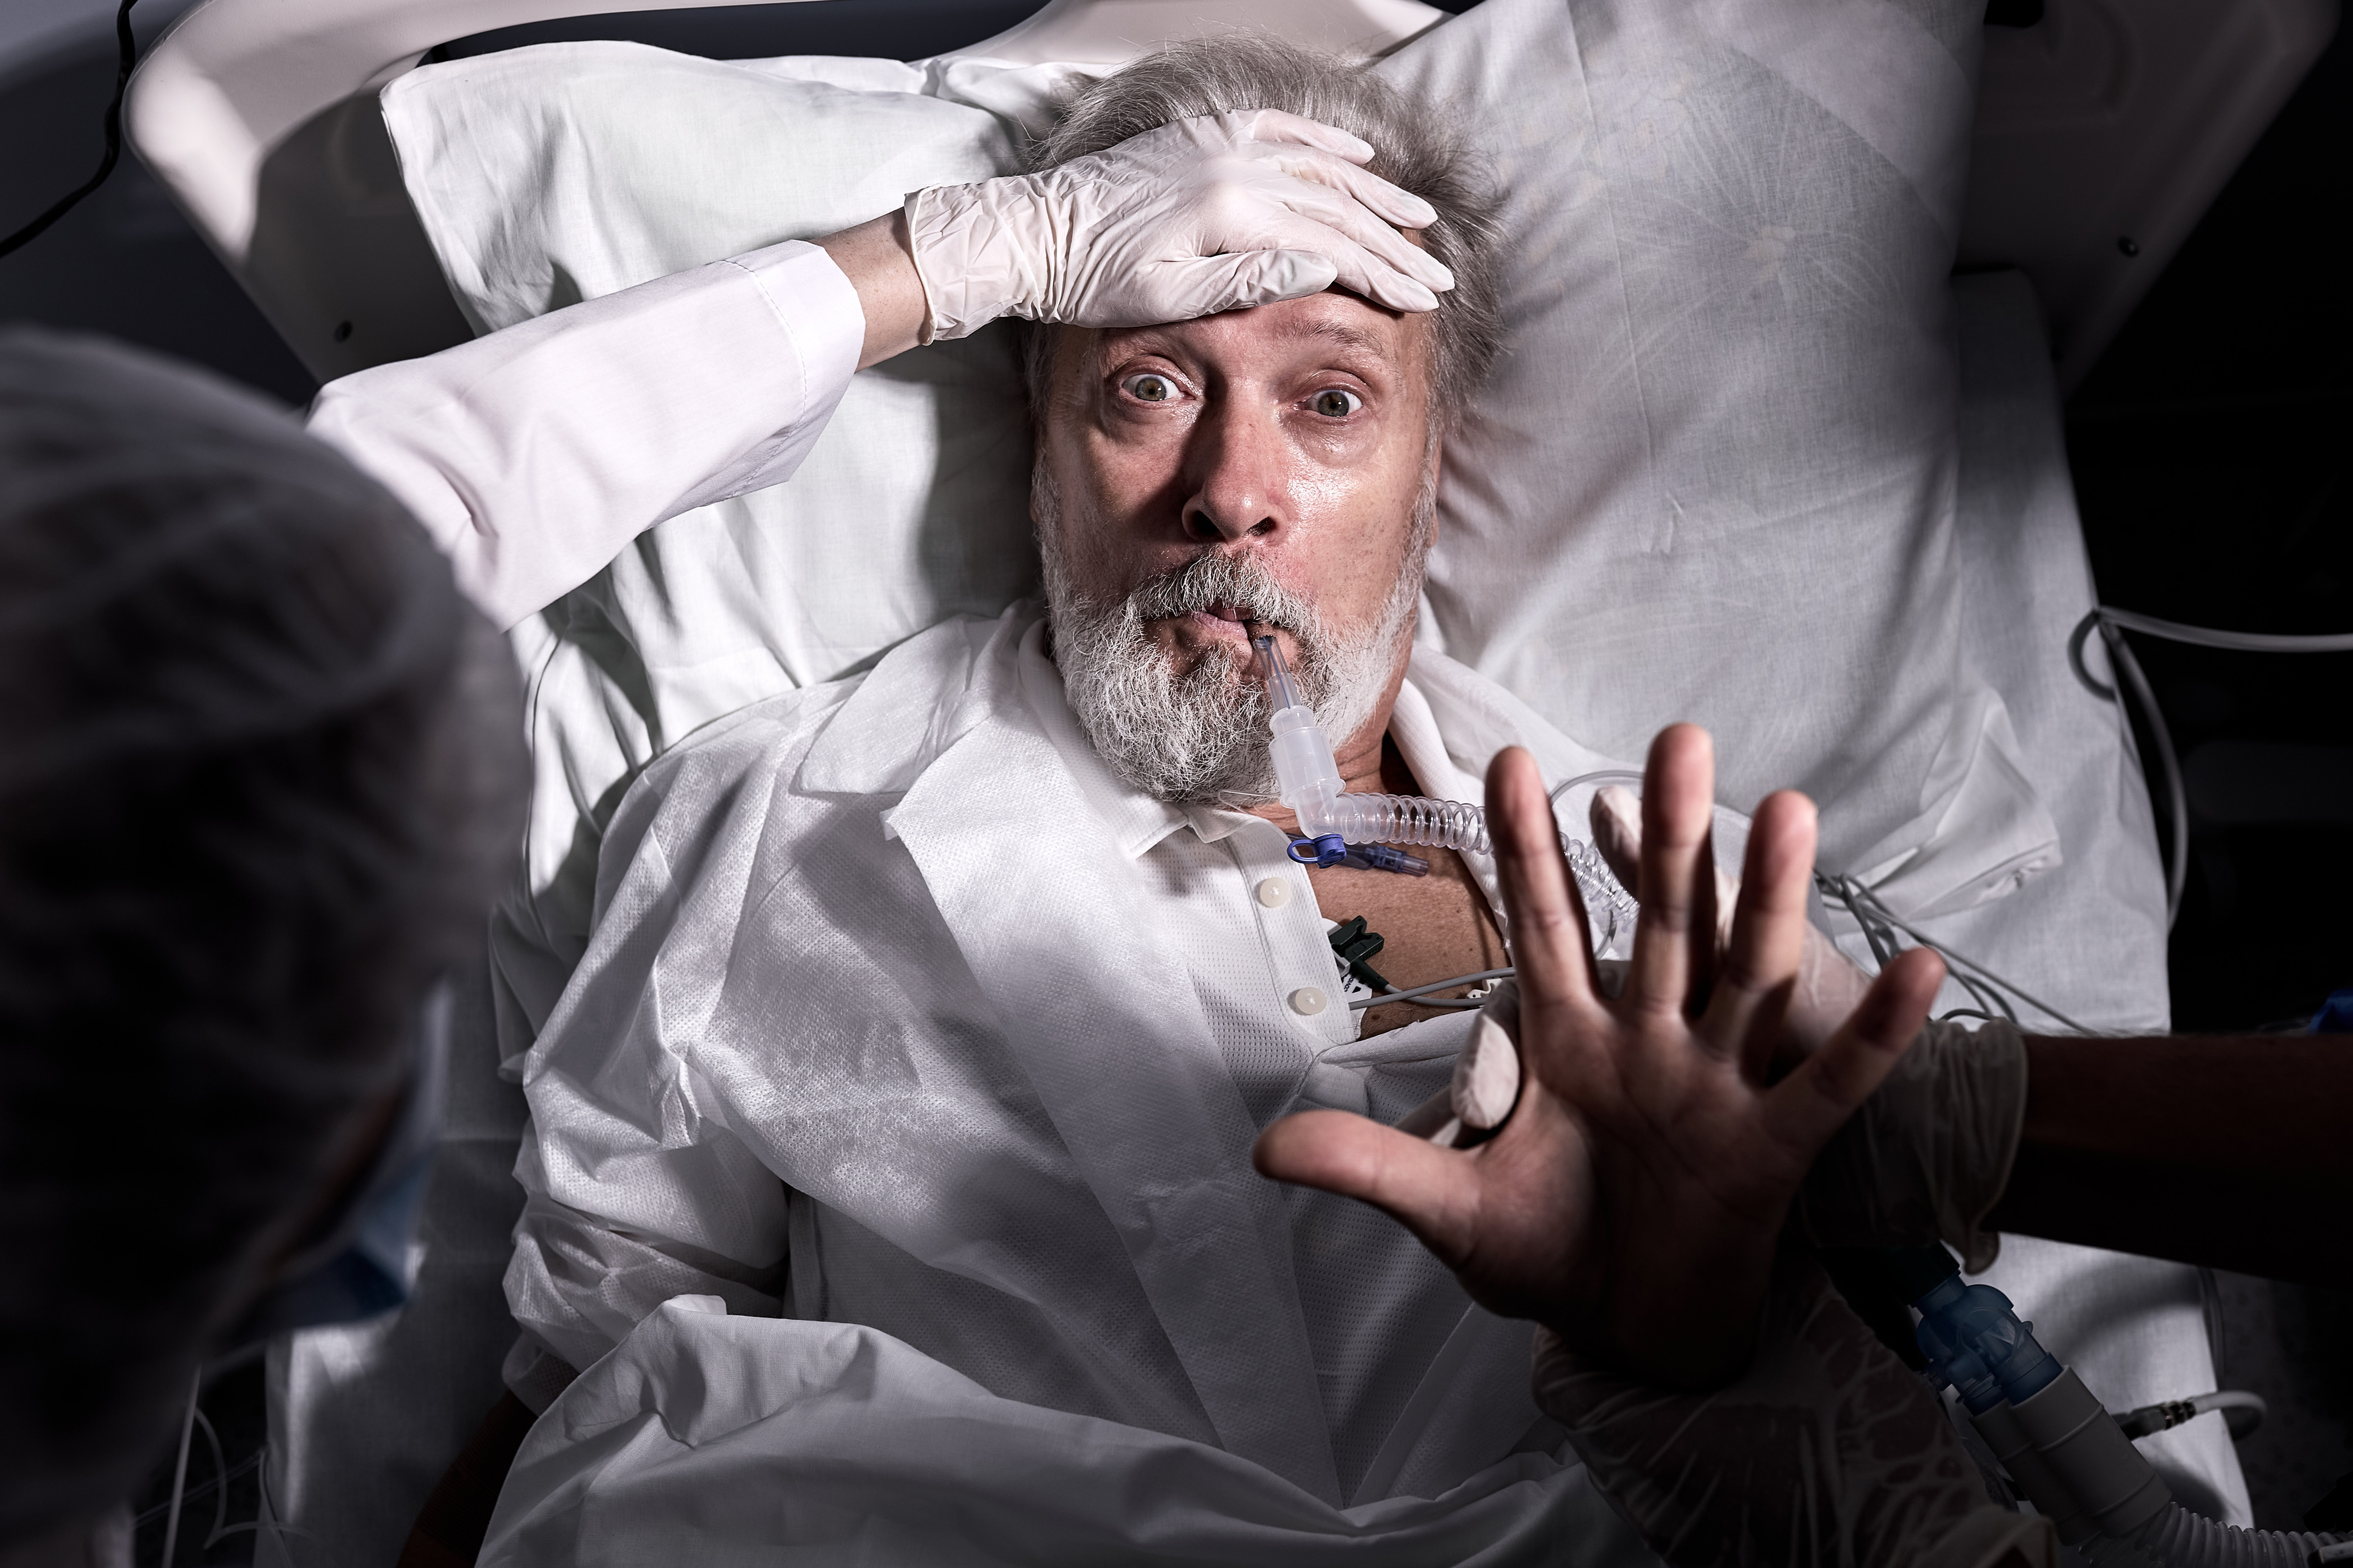 An older man with a surprised expression lies in a hospital bed, wearing a medical gown and connected to a ventilator. A medical professional&#x27;s gloved hands are on his forehead and near his arm